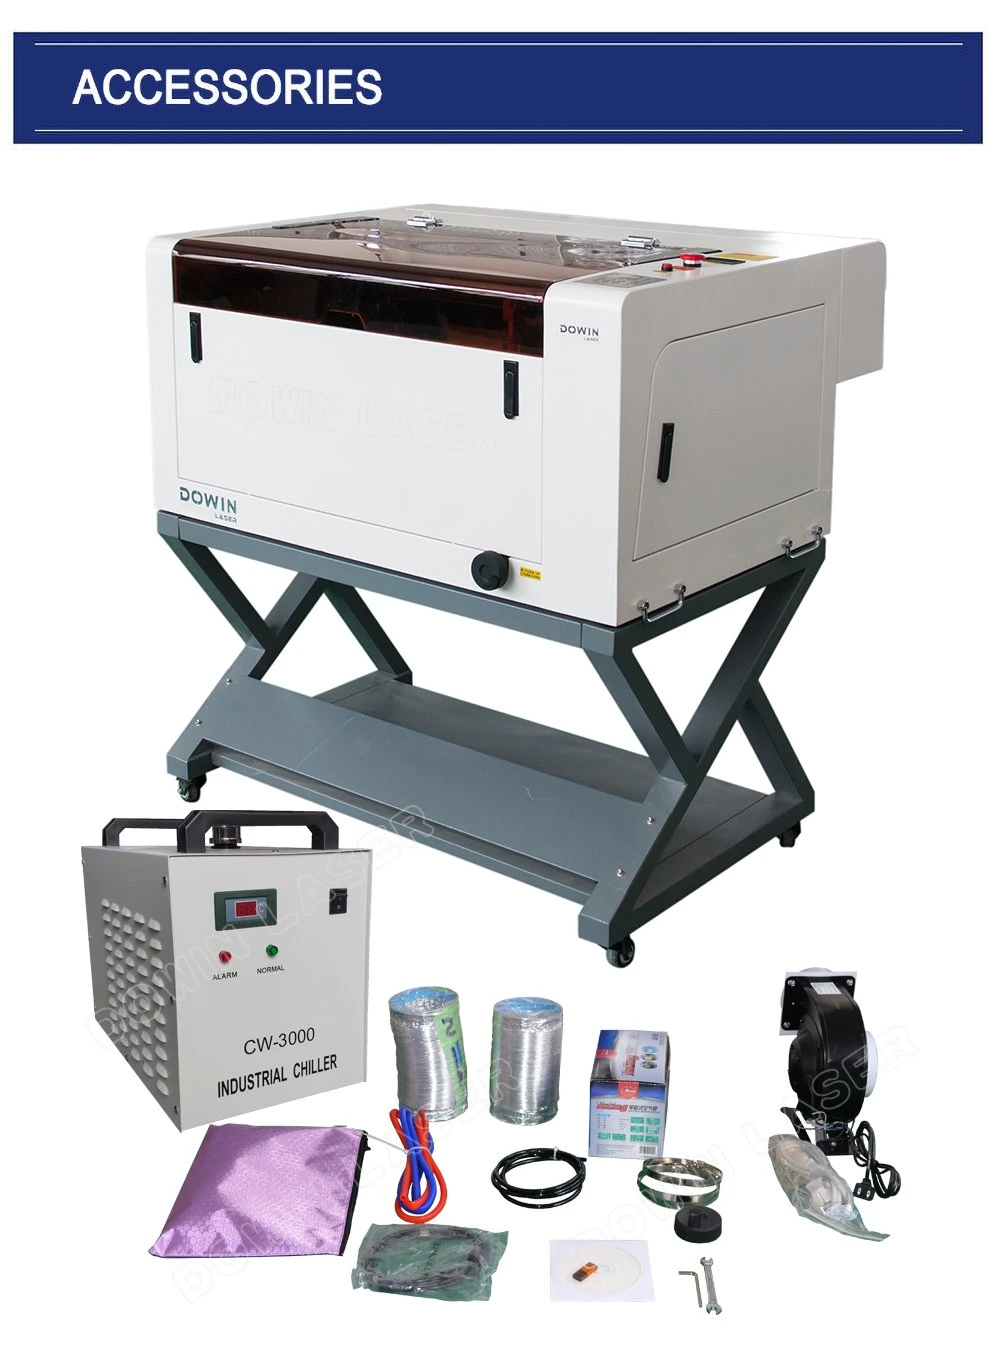 Hot Sale 60W Laser Cutting Machine for Water Cup Engraving